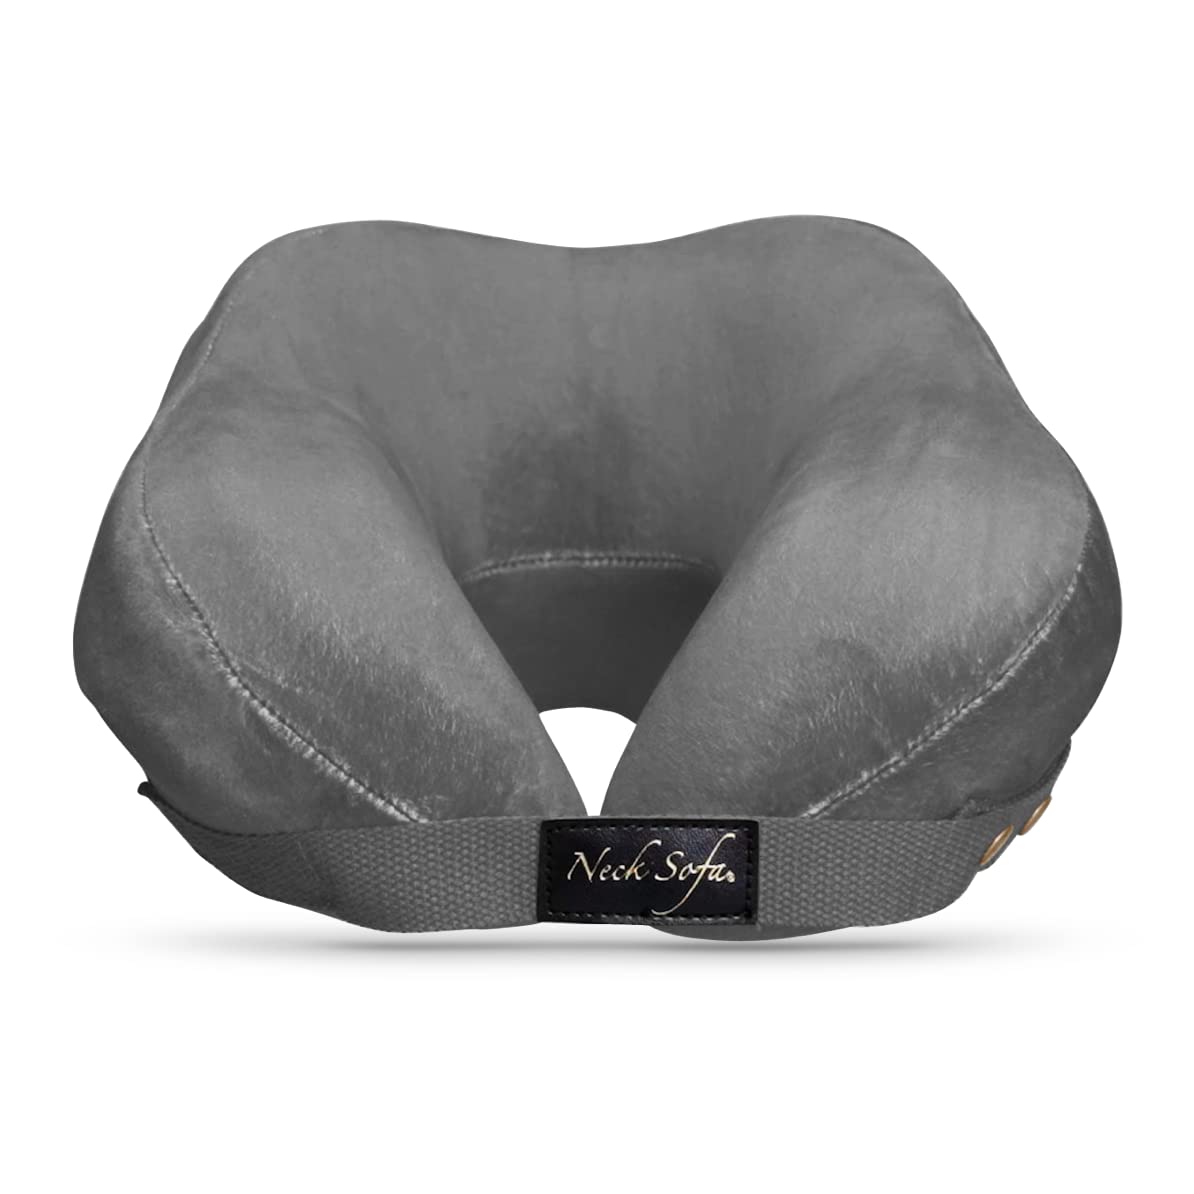 Chiropractic Neck Support Pillow - Cervical Collar - Neck Pain - Lower Back Lumbar Support - Memory Foam Travel Pillow - Grey